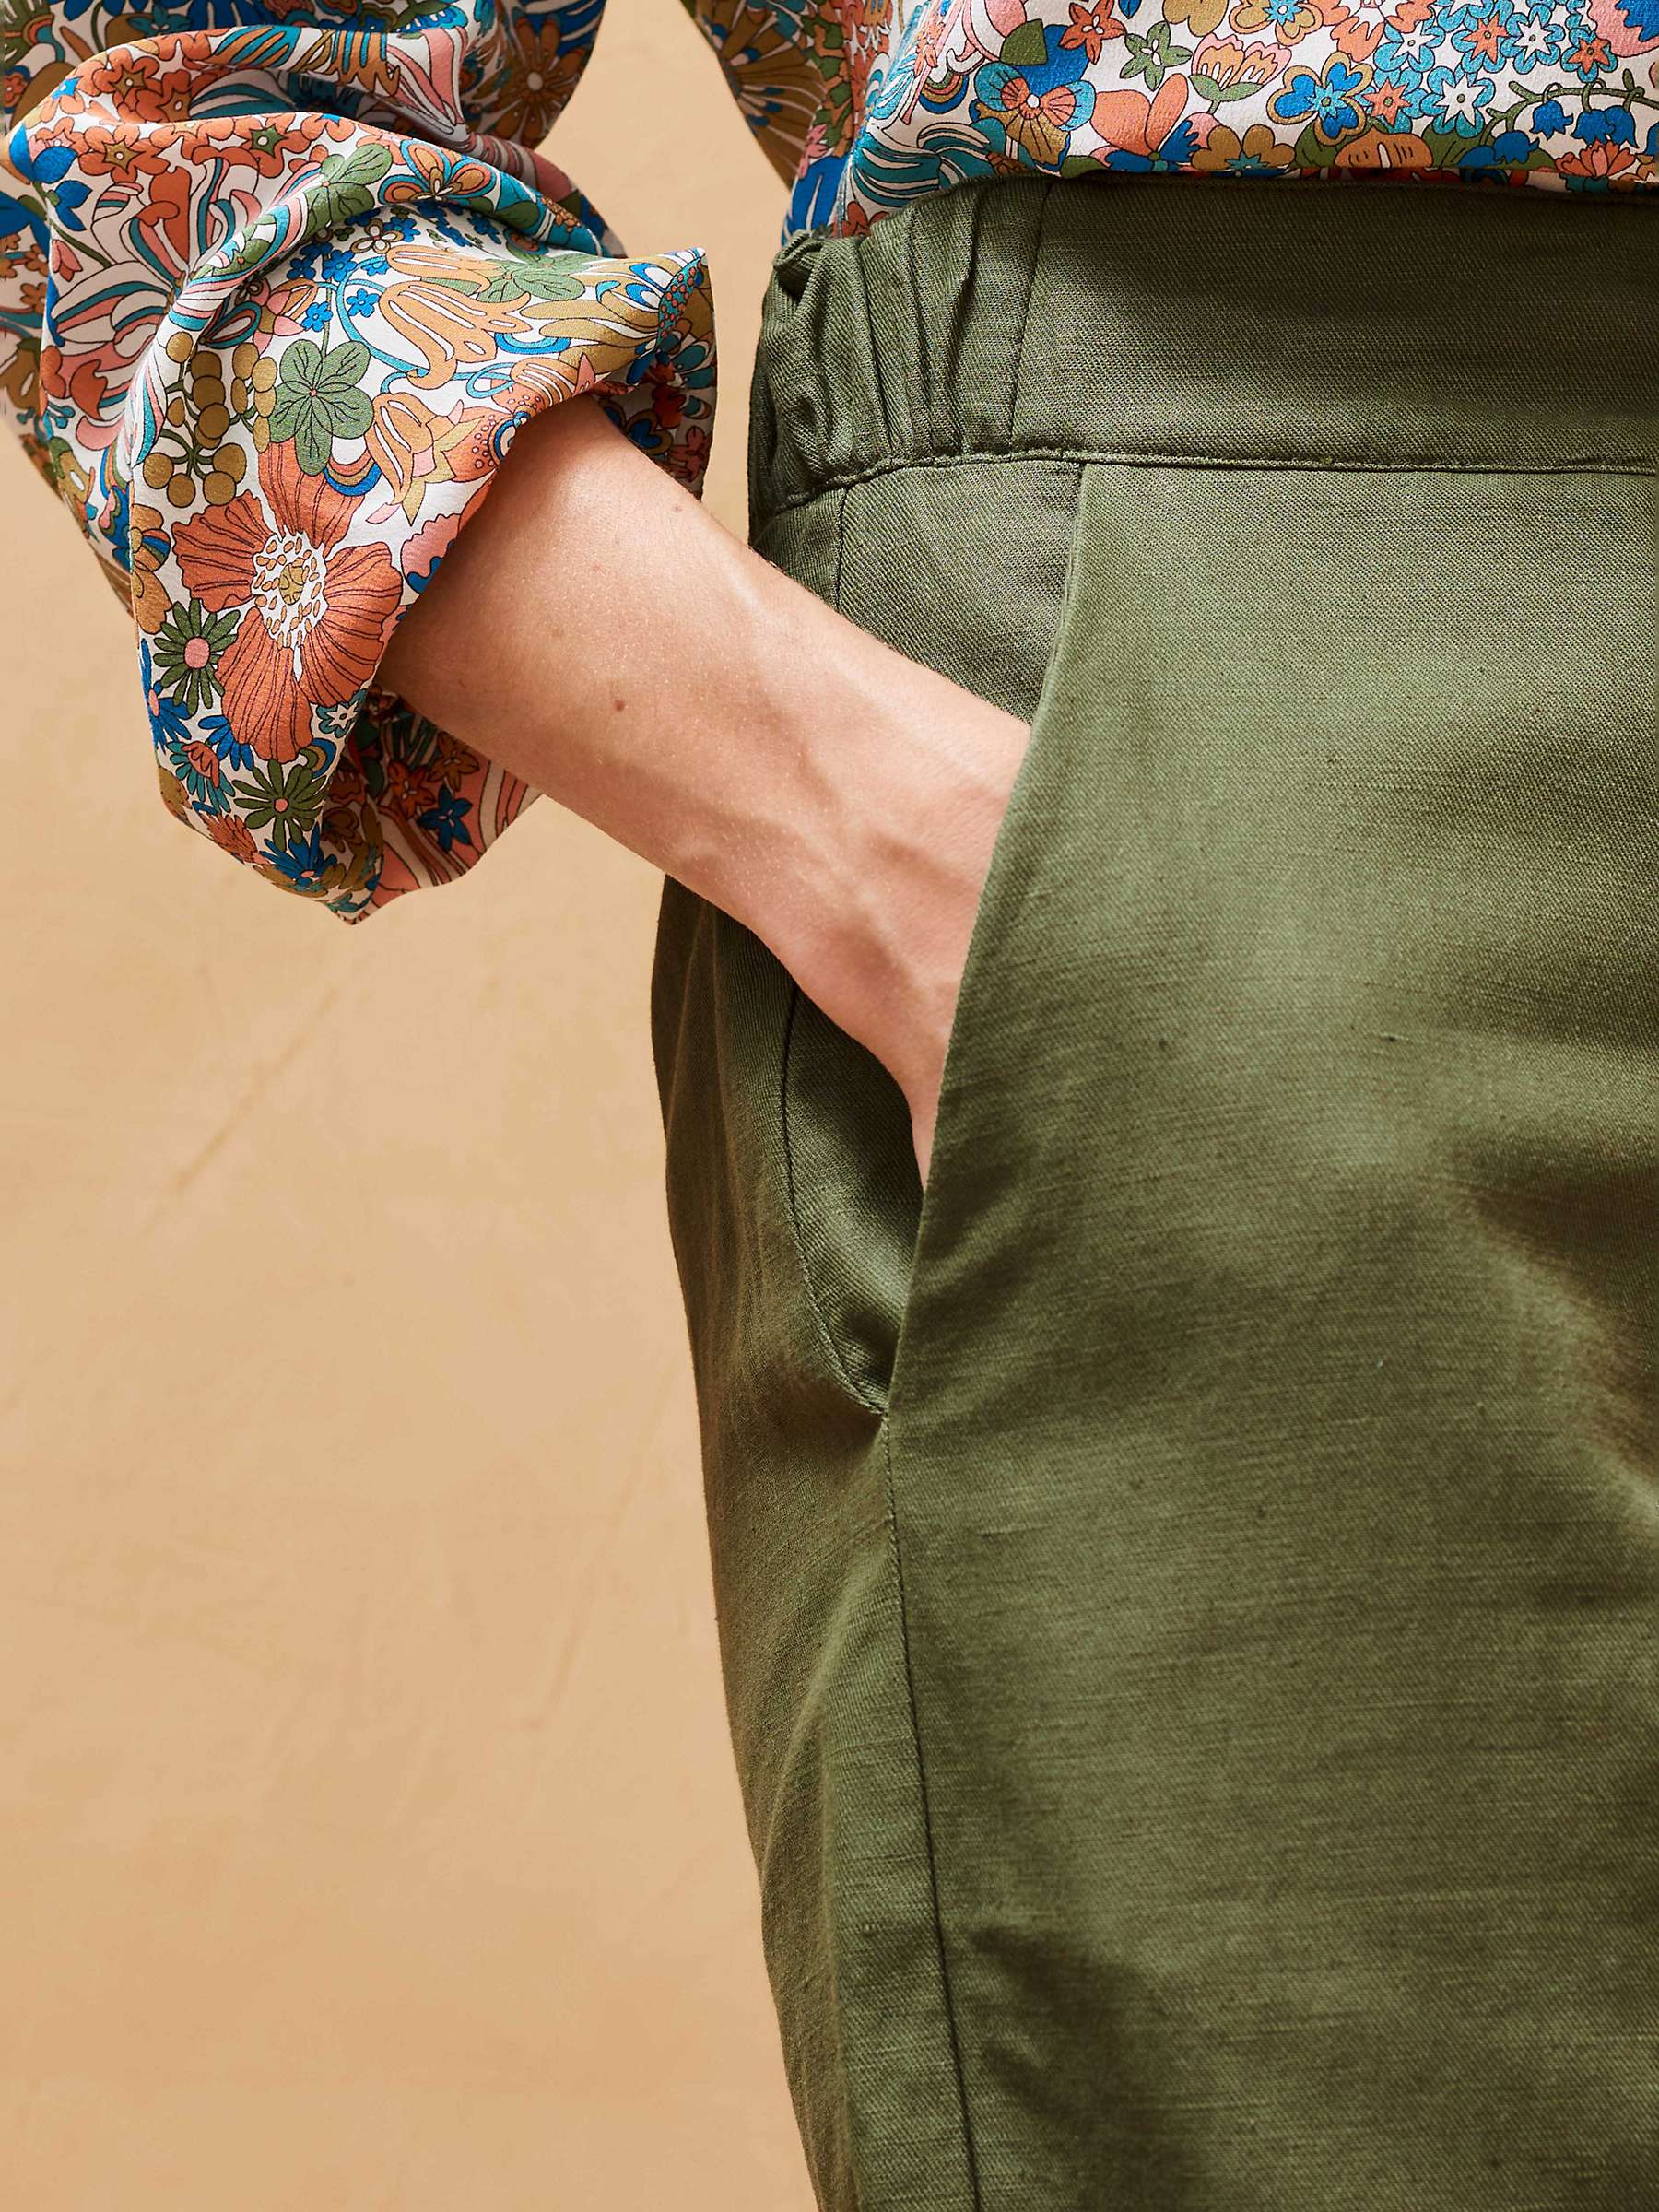 Buy Brora Cotton Linen Blend Tapered Trousers, Olive Online at johnlewis.com